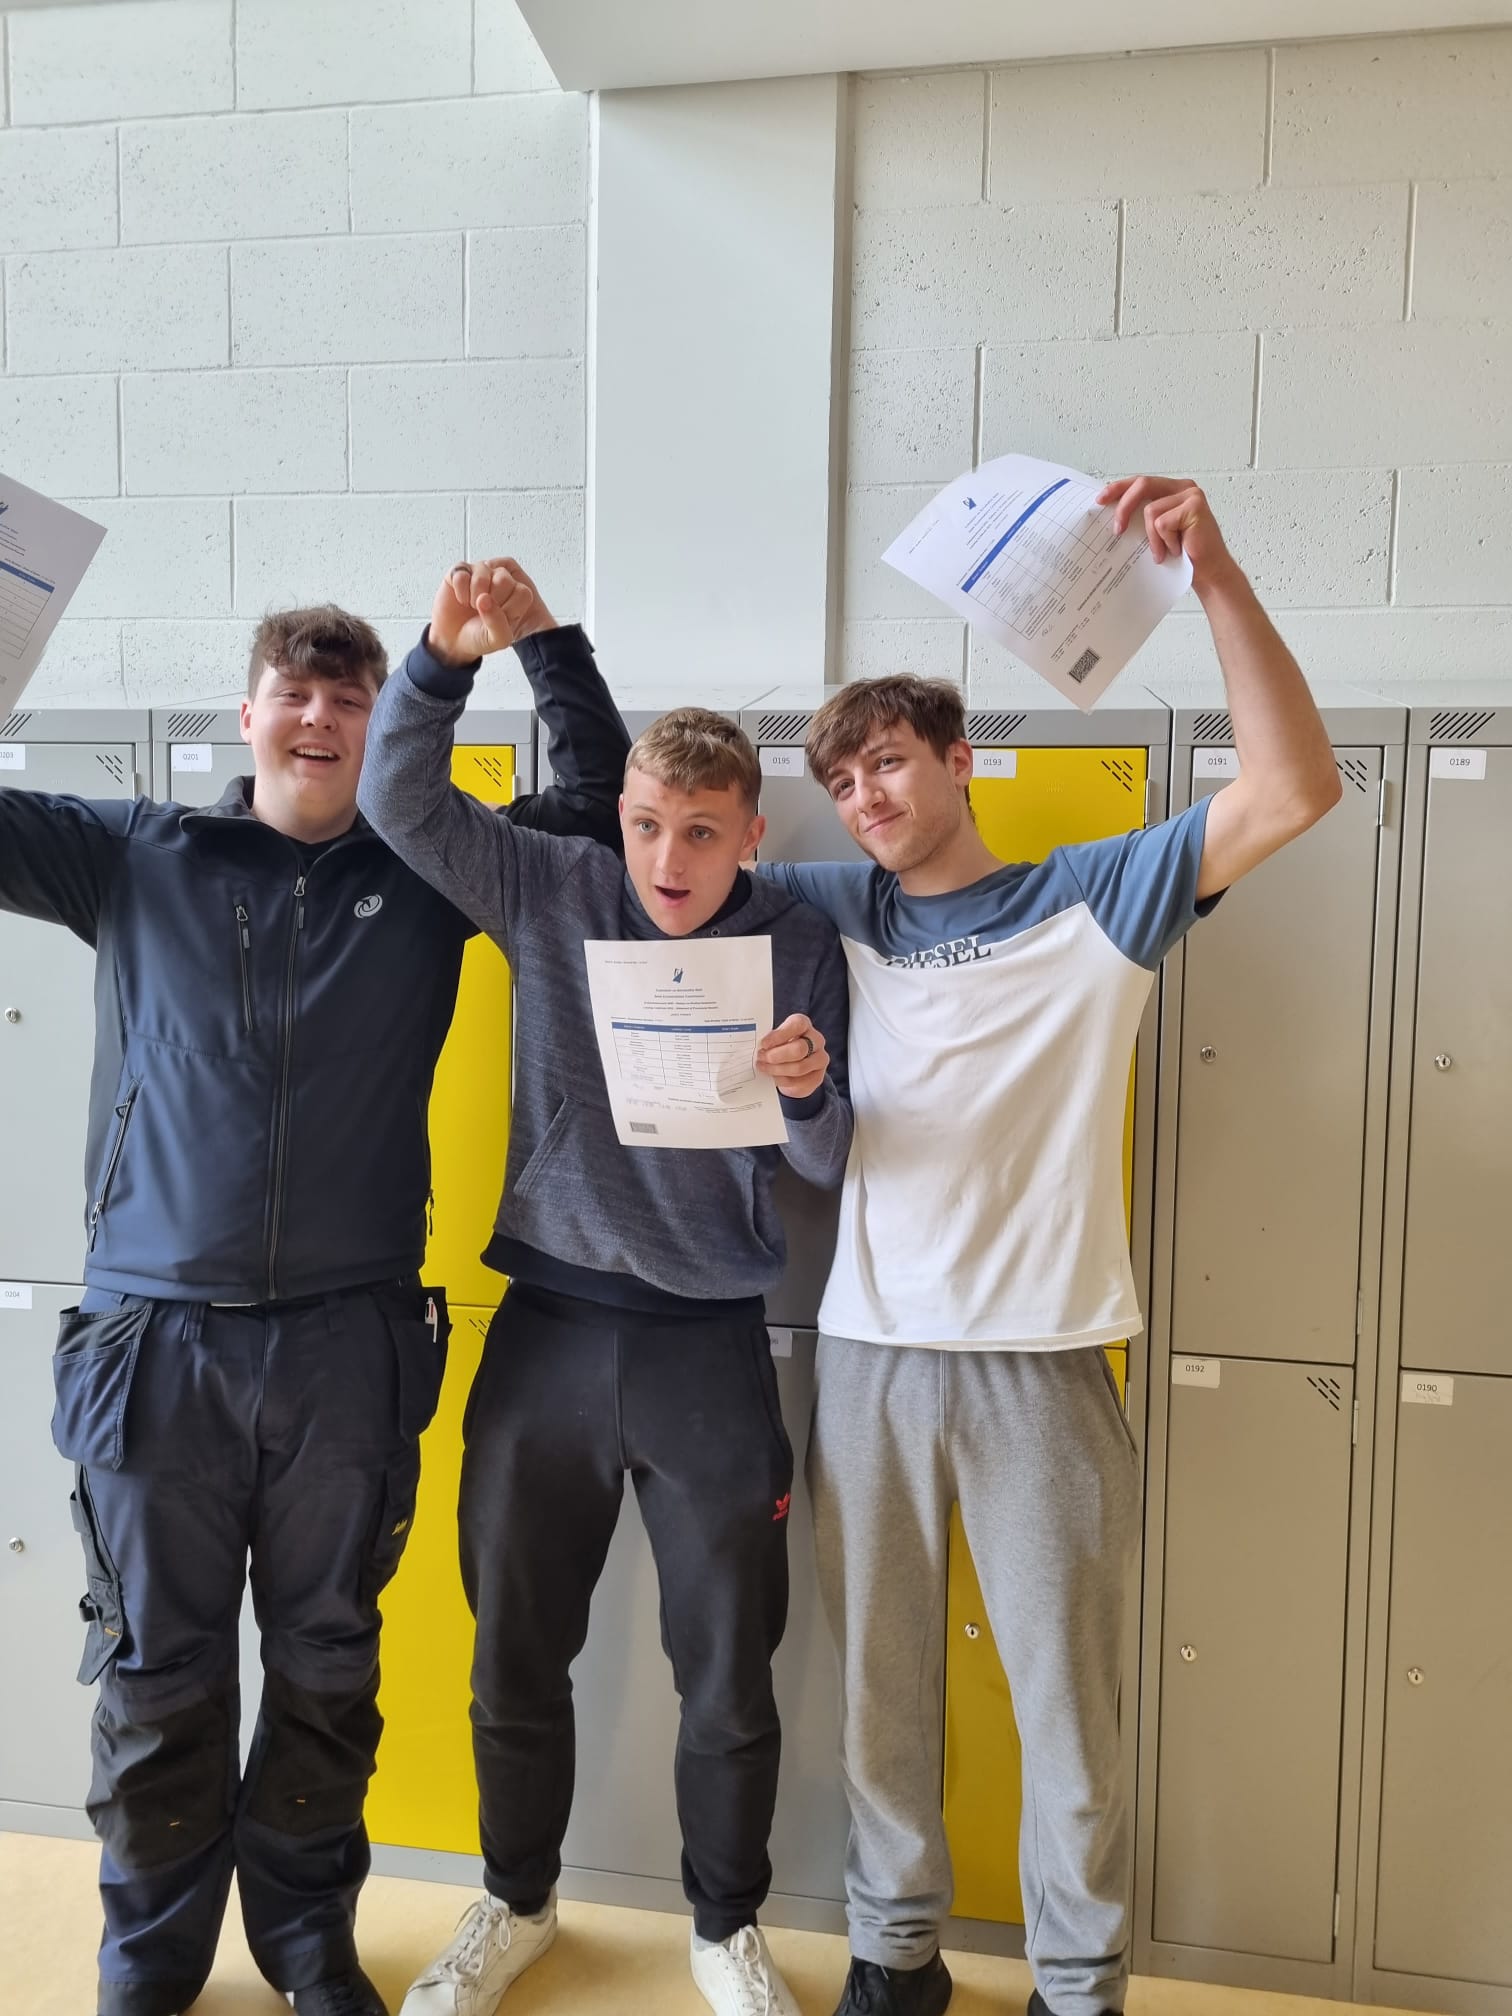 Students celebrate their results at Naas Community College in Co Kildare